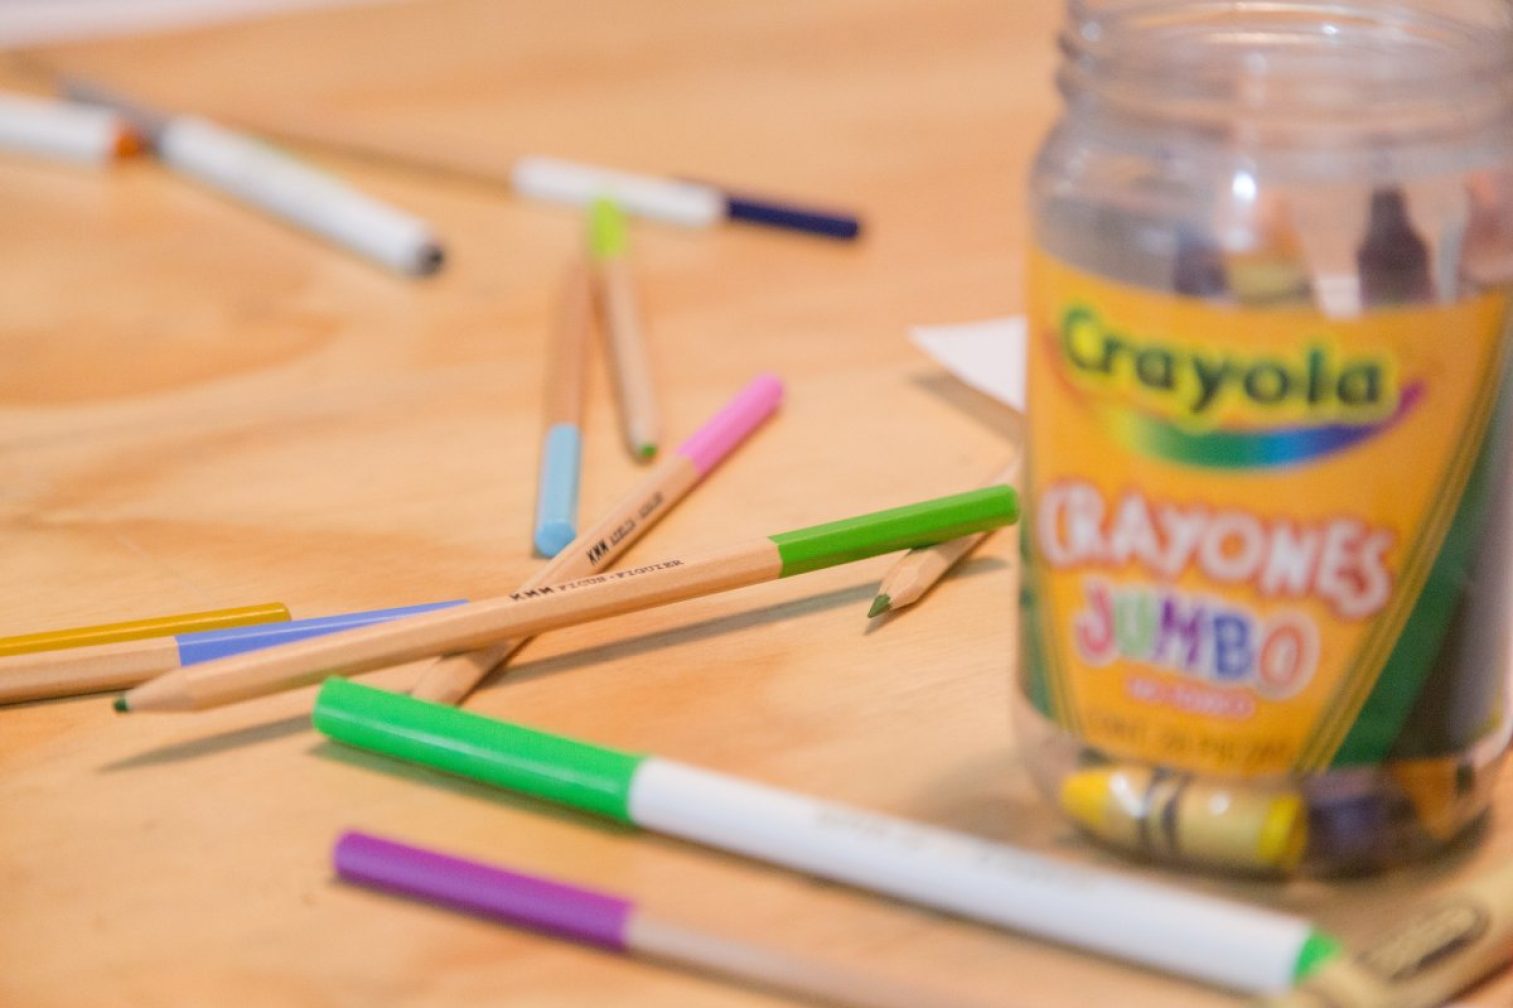 Crayola pencils and crayons scattered on wooden floor